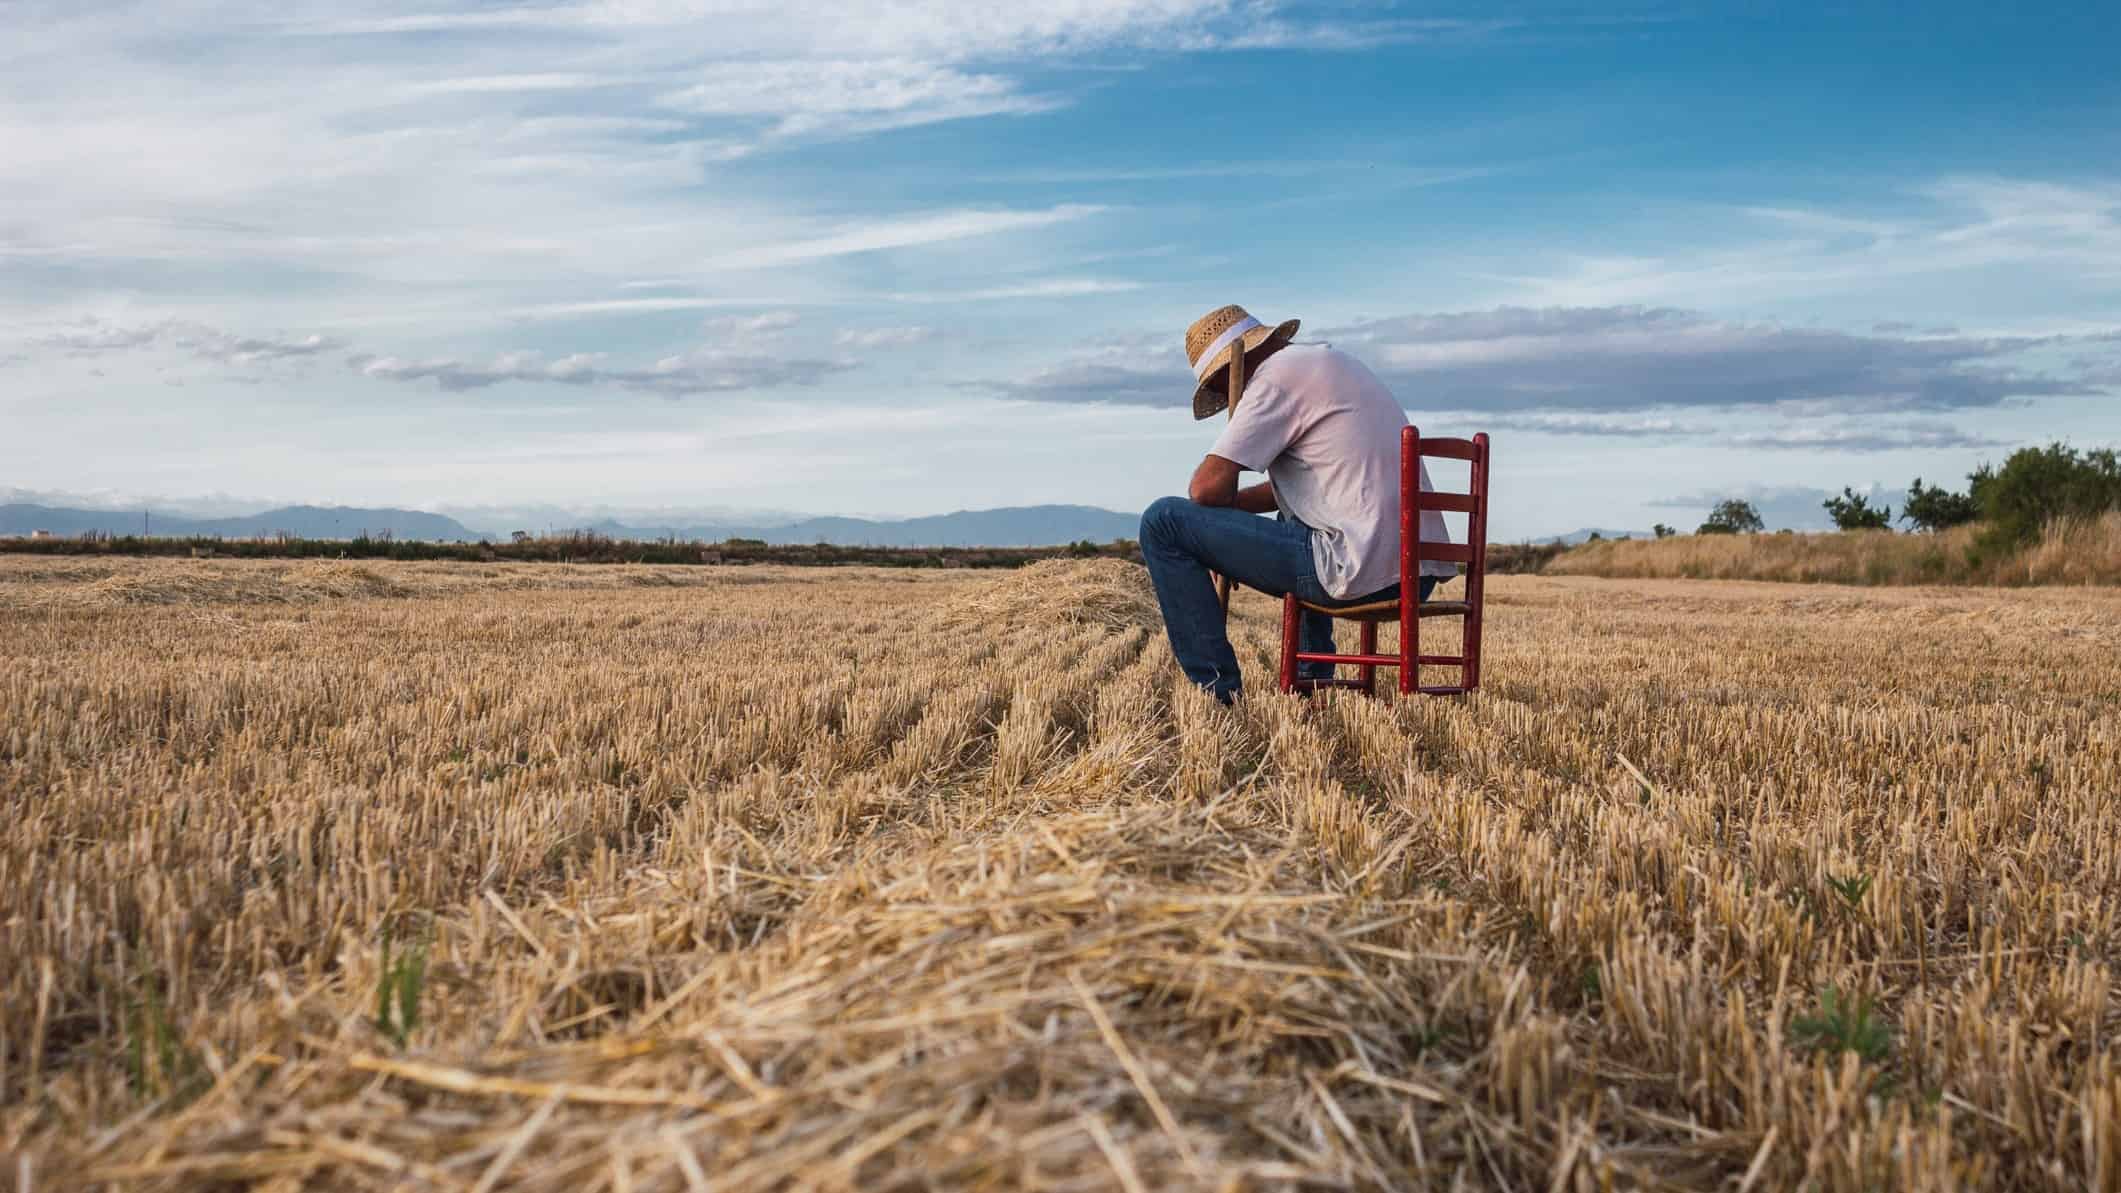 Man sits on a chair in field of grain with head in hands.